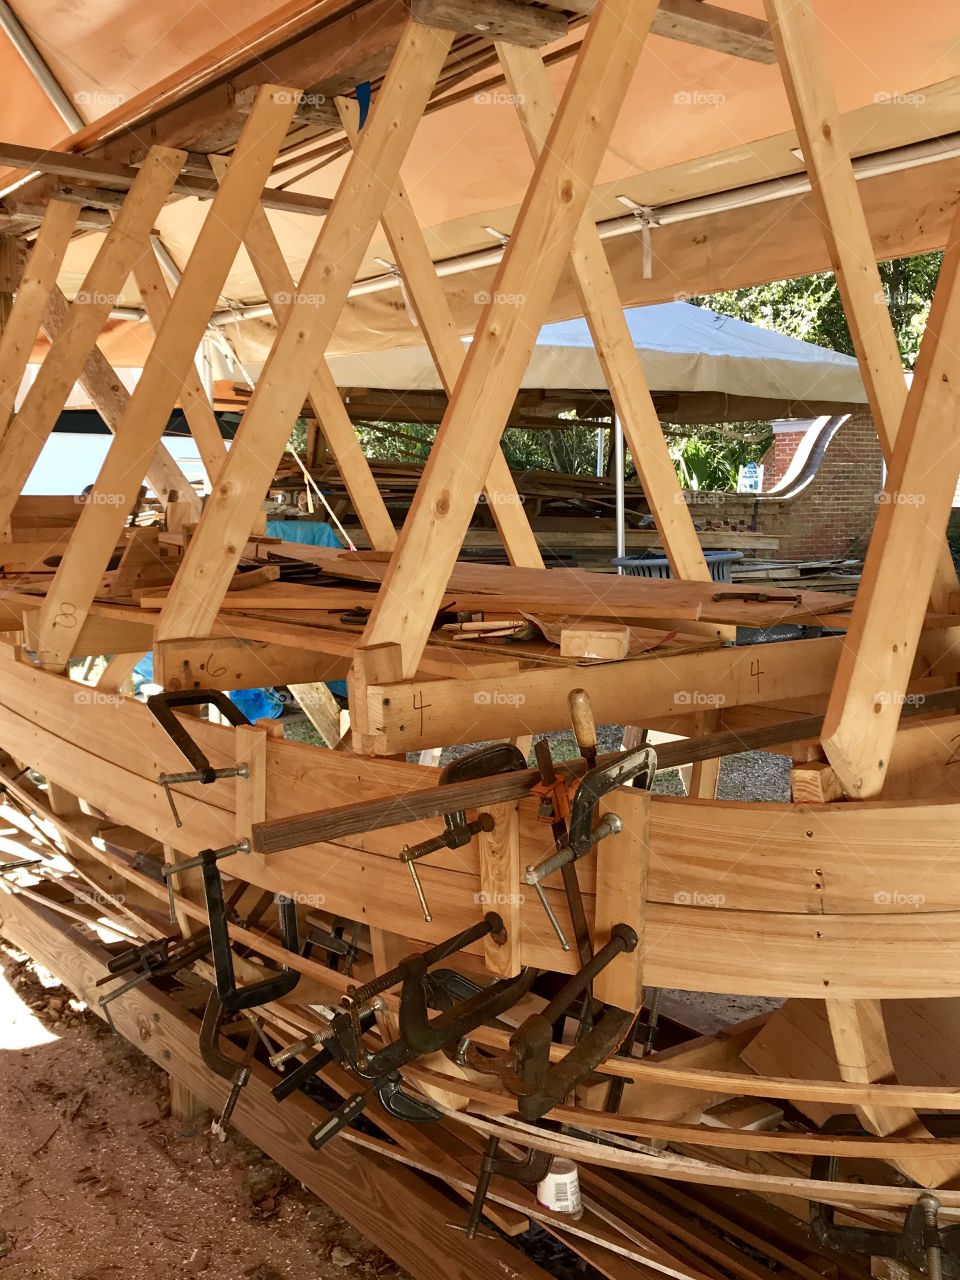 Construction of a boat frame and bending wood with many clamps